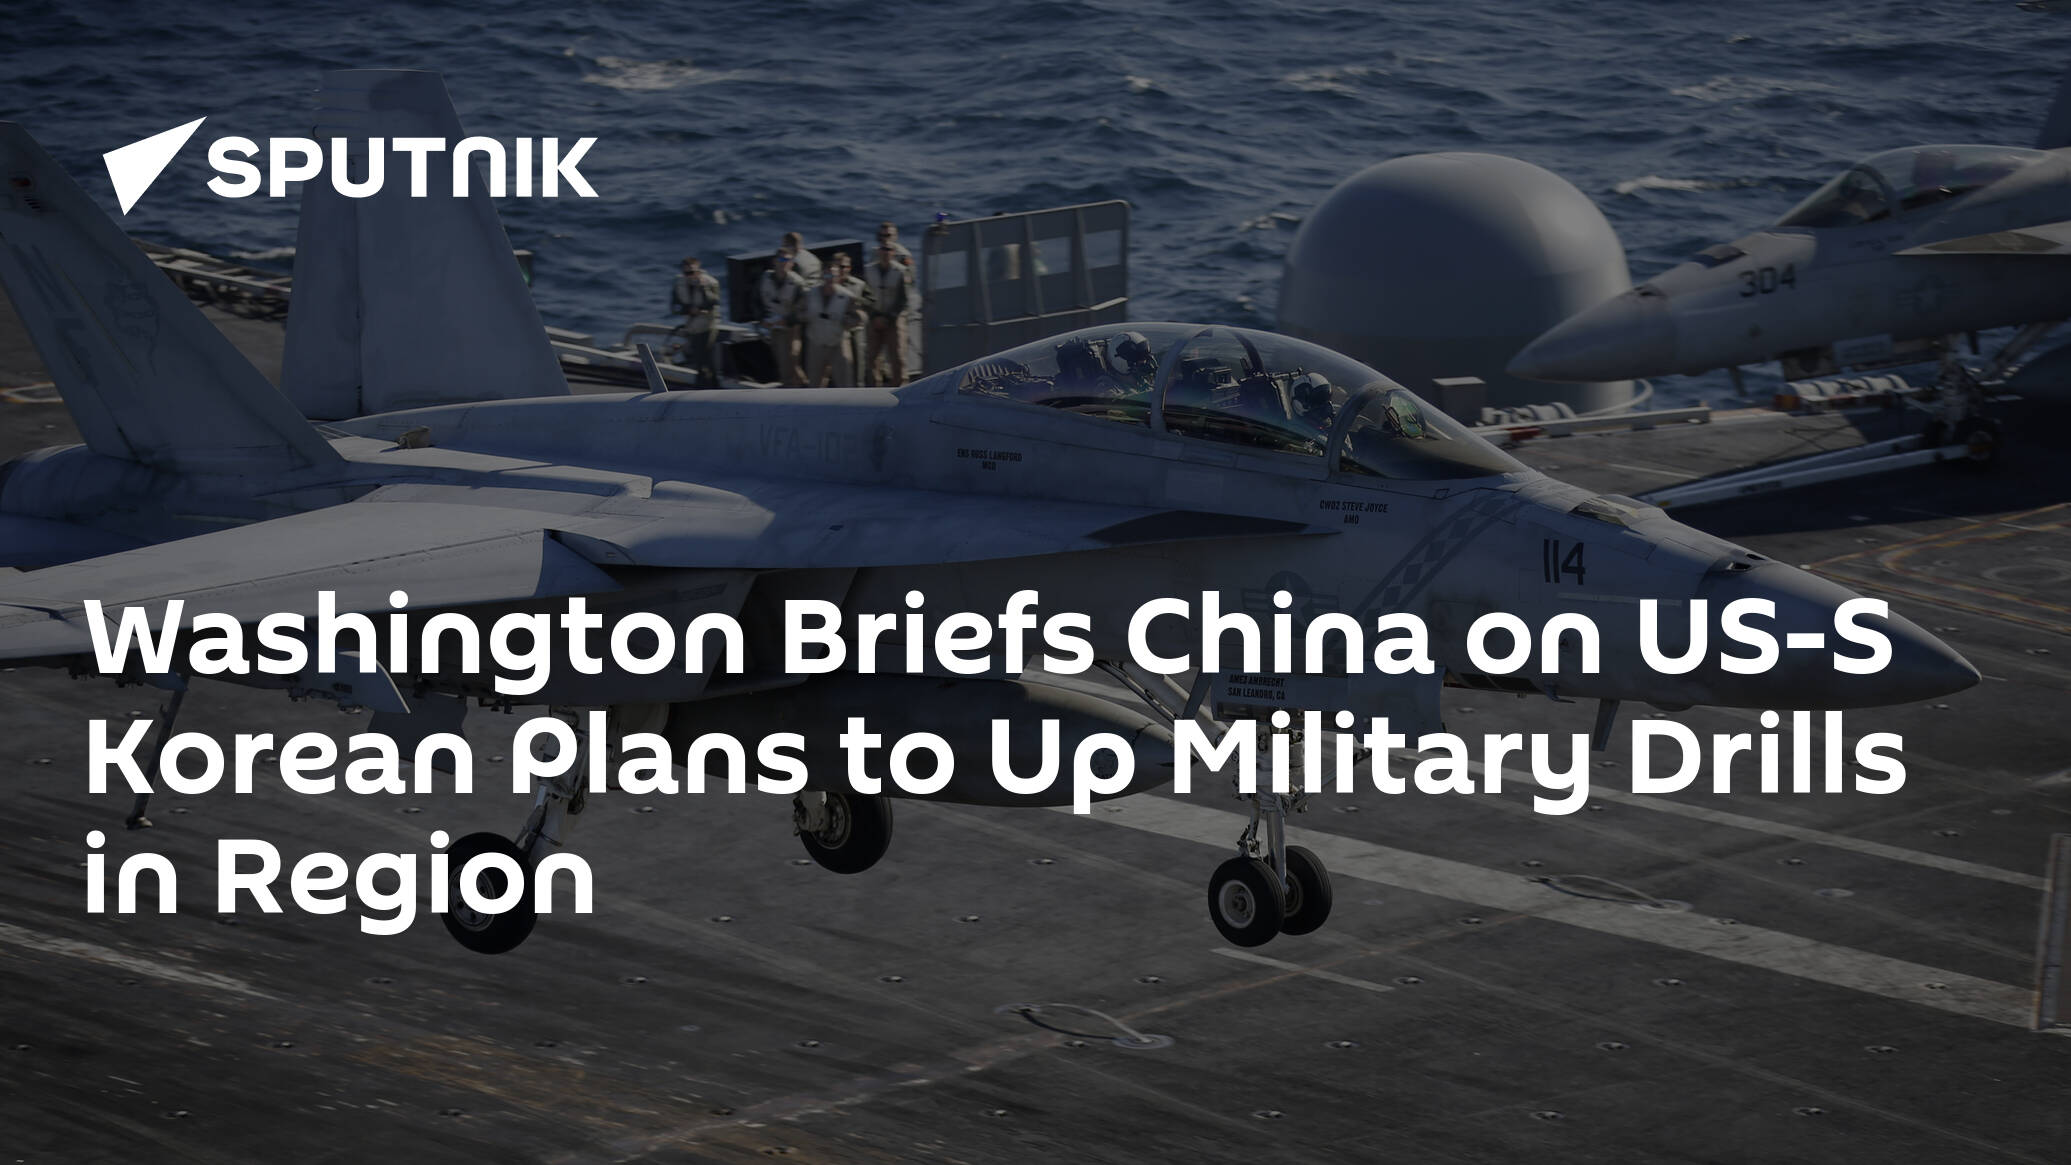 Washington Briefs China on US-S Korean Plans to Up Military Drills in Region